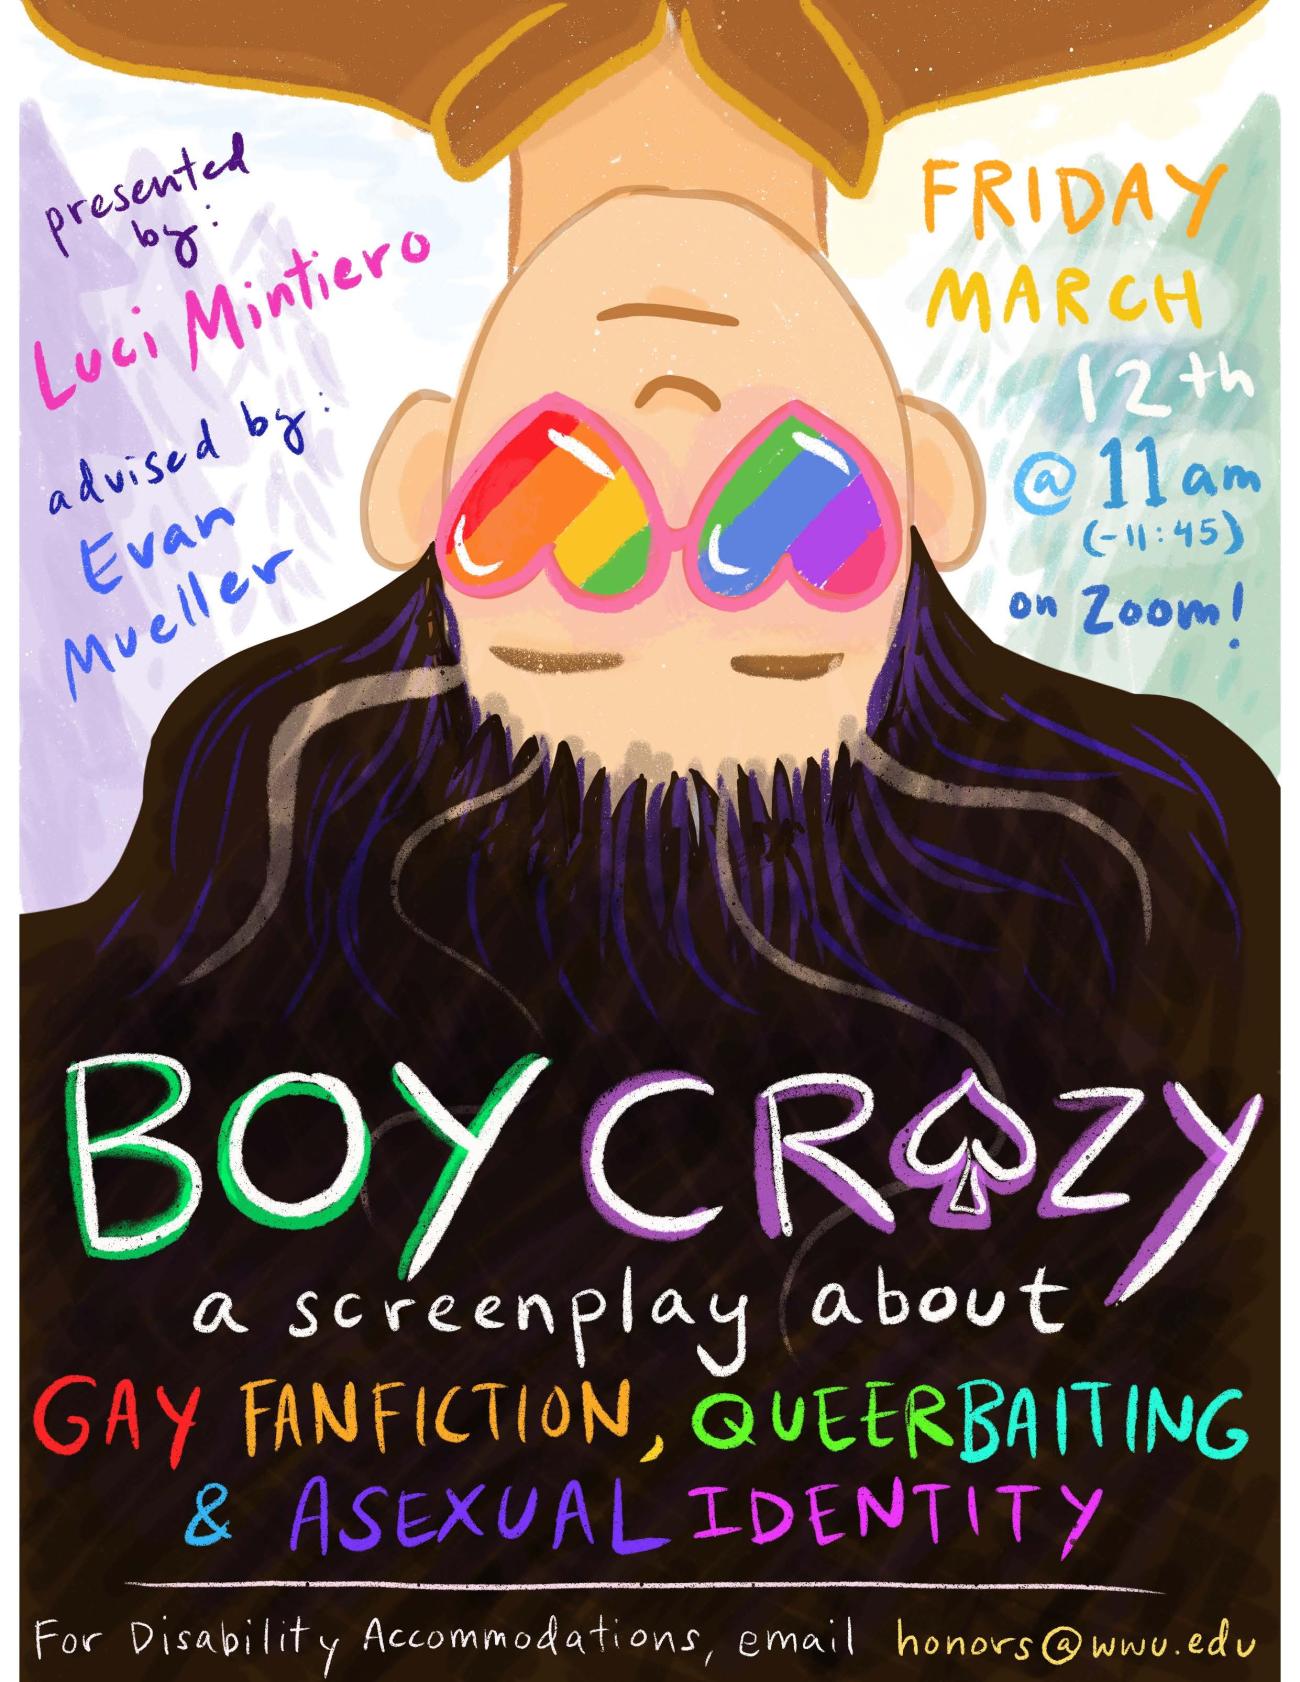   “An image of a young woman’s face, upside down and smiling. She’s wearing heart-shaped glasses with that are painted over with an LGBT pride rainbow pattern, and her dark hair is spilling down to create the backdrop for these words: "Boy Crazy. A screenplay about gay fanfiction, queerbaiting, and asexual identity. Presented by Luci Mintiero, and advised by Evan Mueller. Friday, March 12th, from 11am to 11:45 on Zoom. For Disability Accommodations, please email honors@wwu.edu."